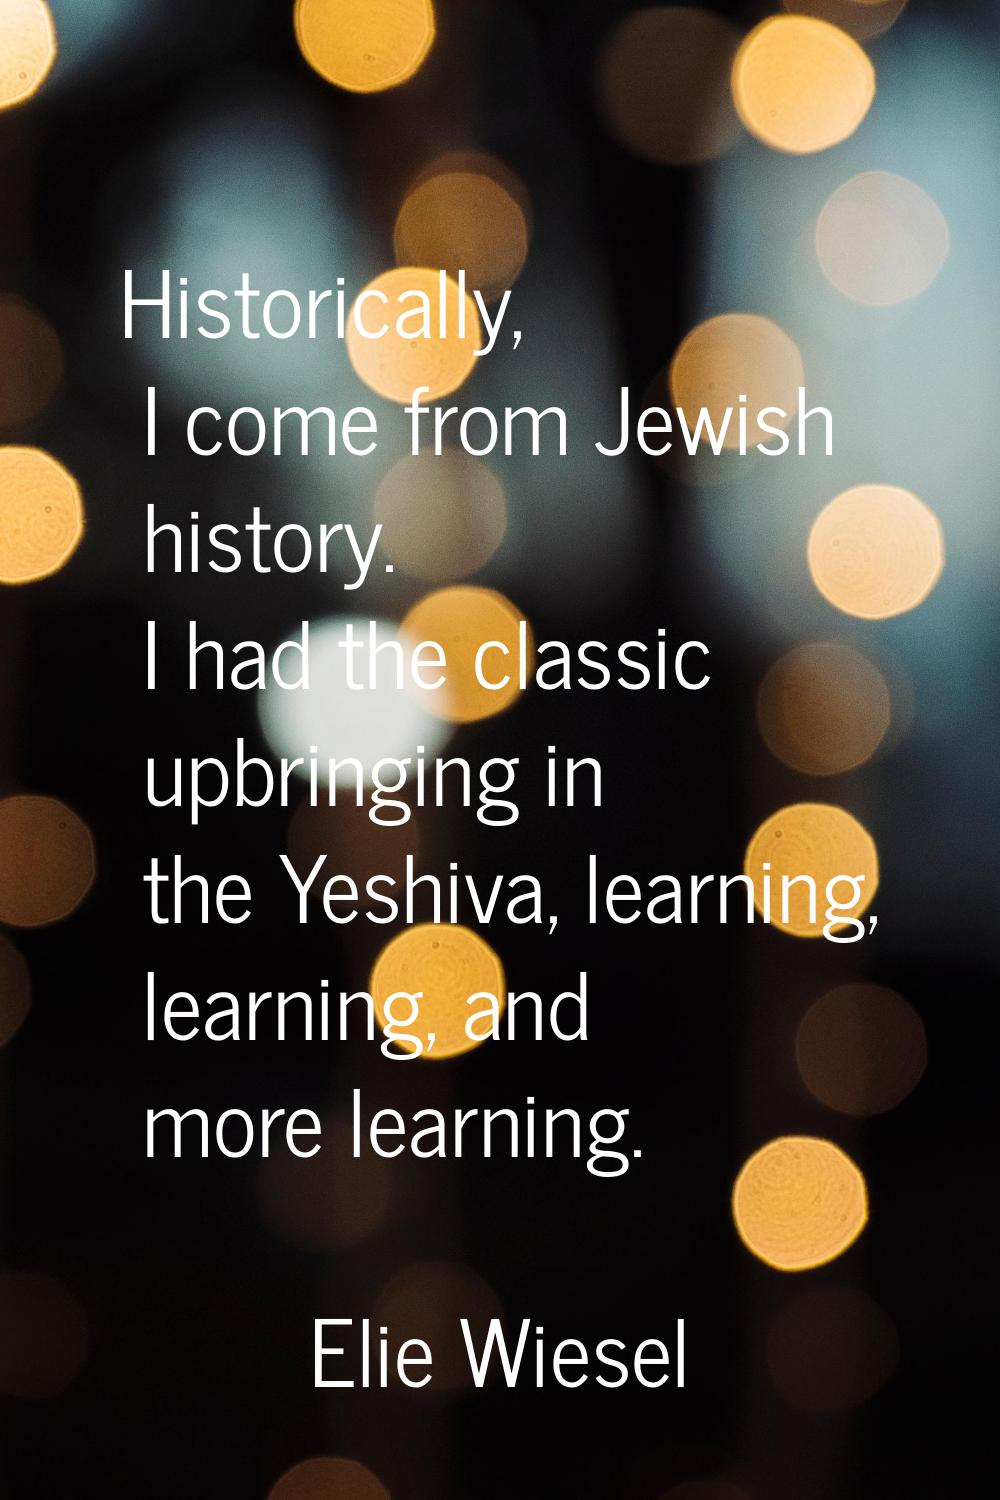 Historically, I come from Jewish history. I had the classic upbringing in the Yeshiva, learning, le